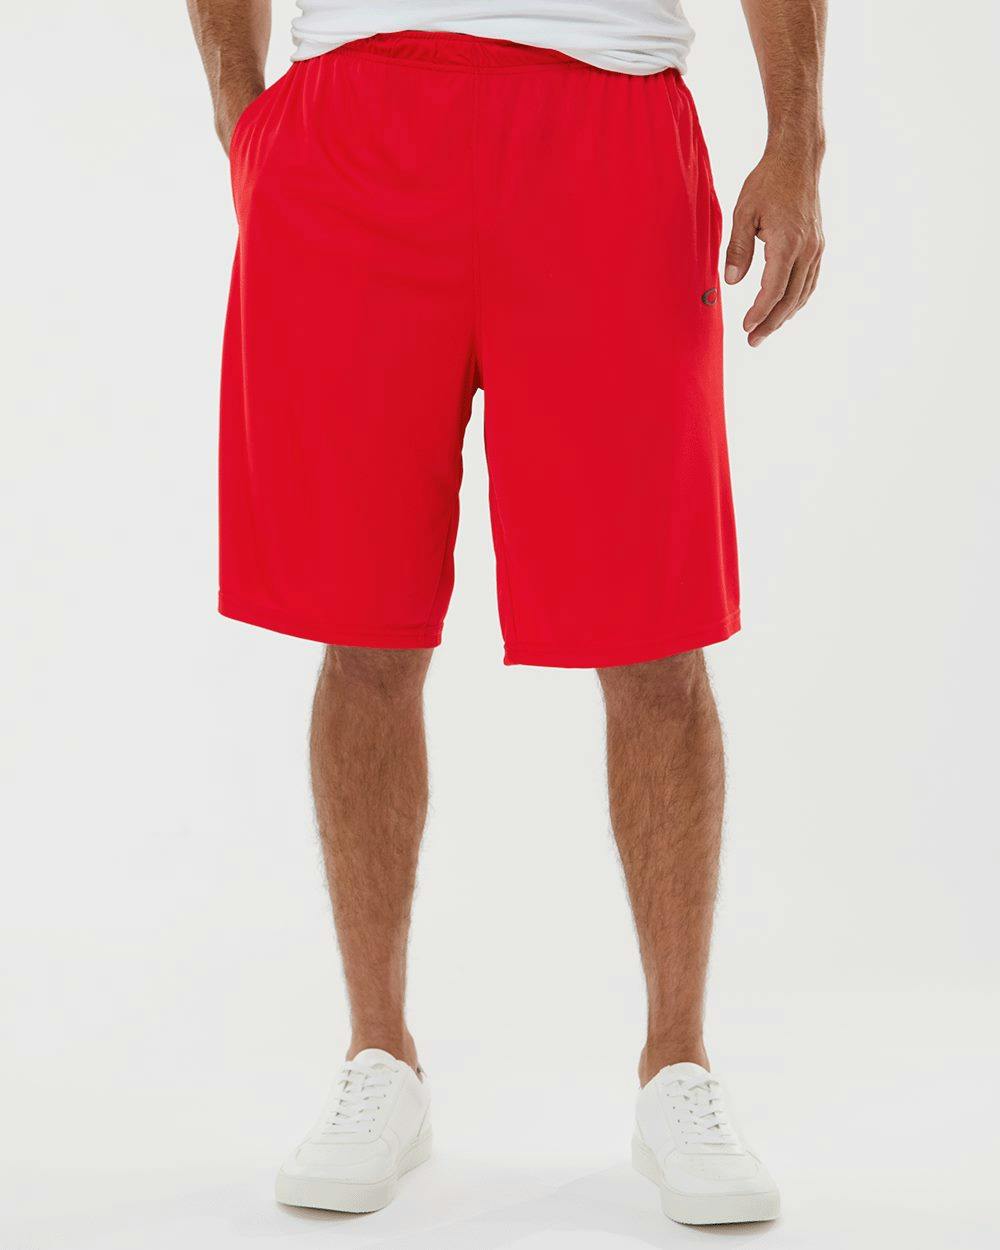 Image for Team Issue Hydrolix 9" Shorts - FOA402995